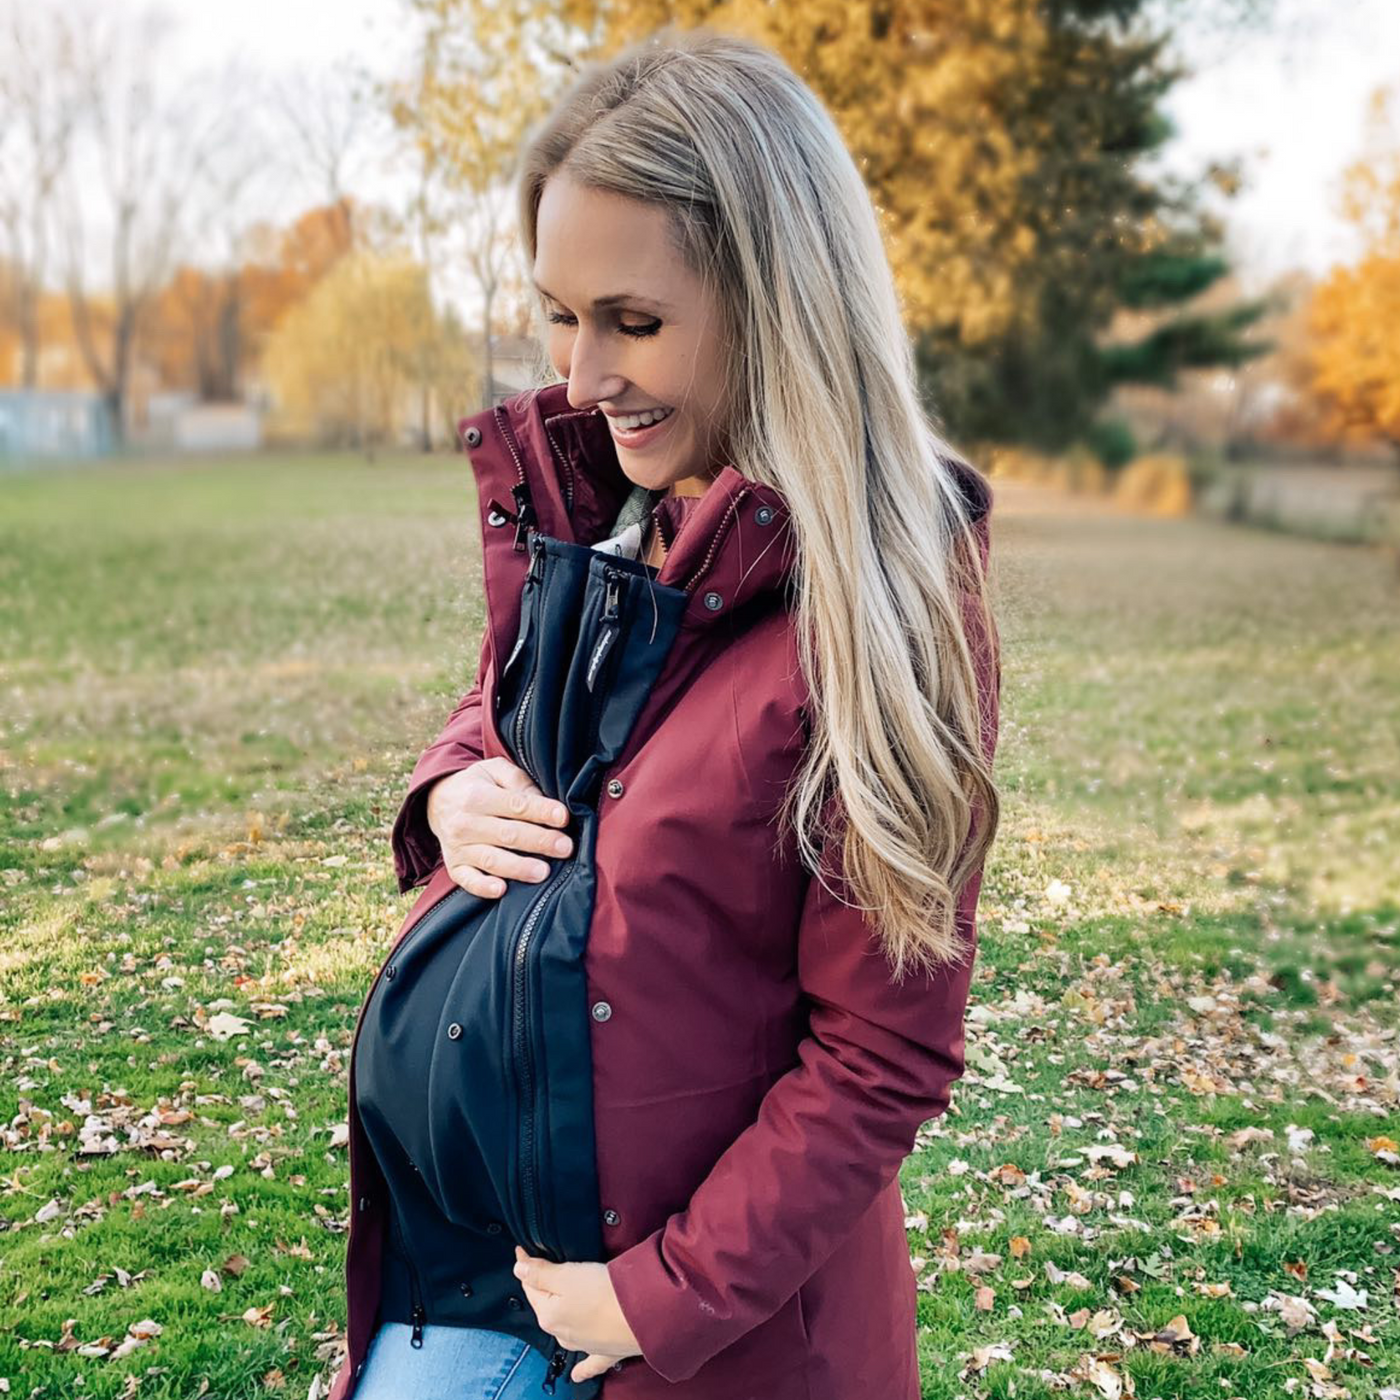 Make My Belly Fit Women's Universal Jacket Extender Maternity